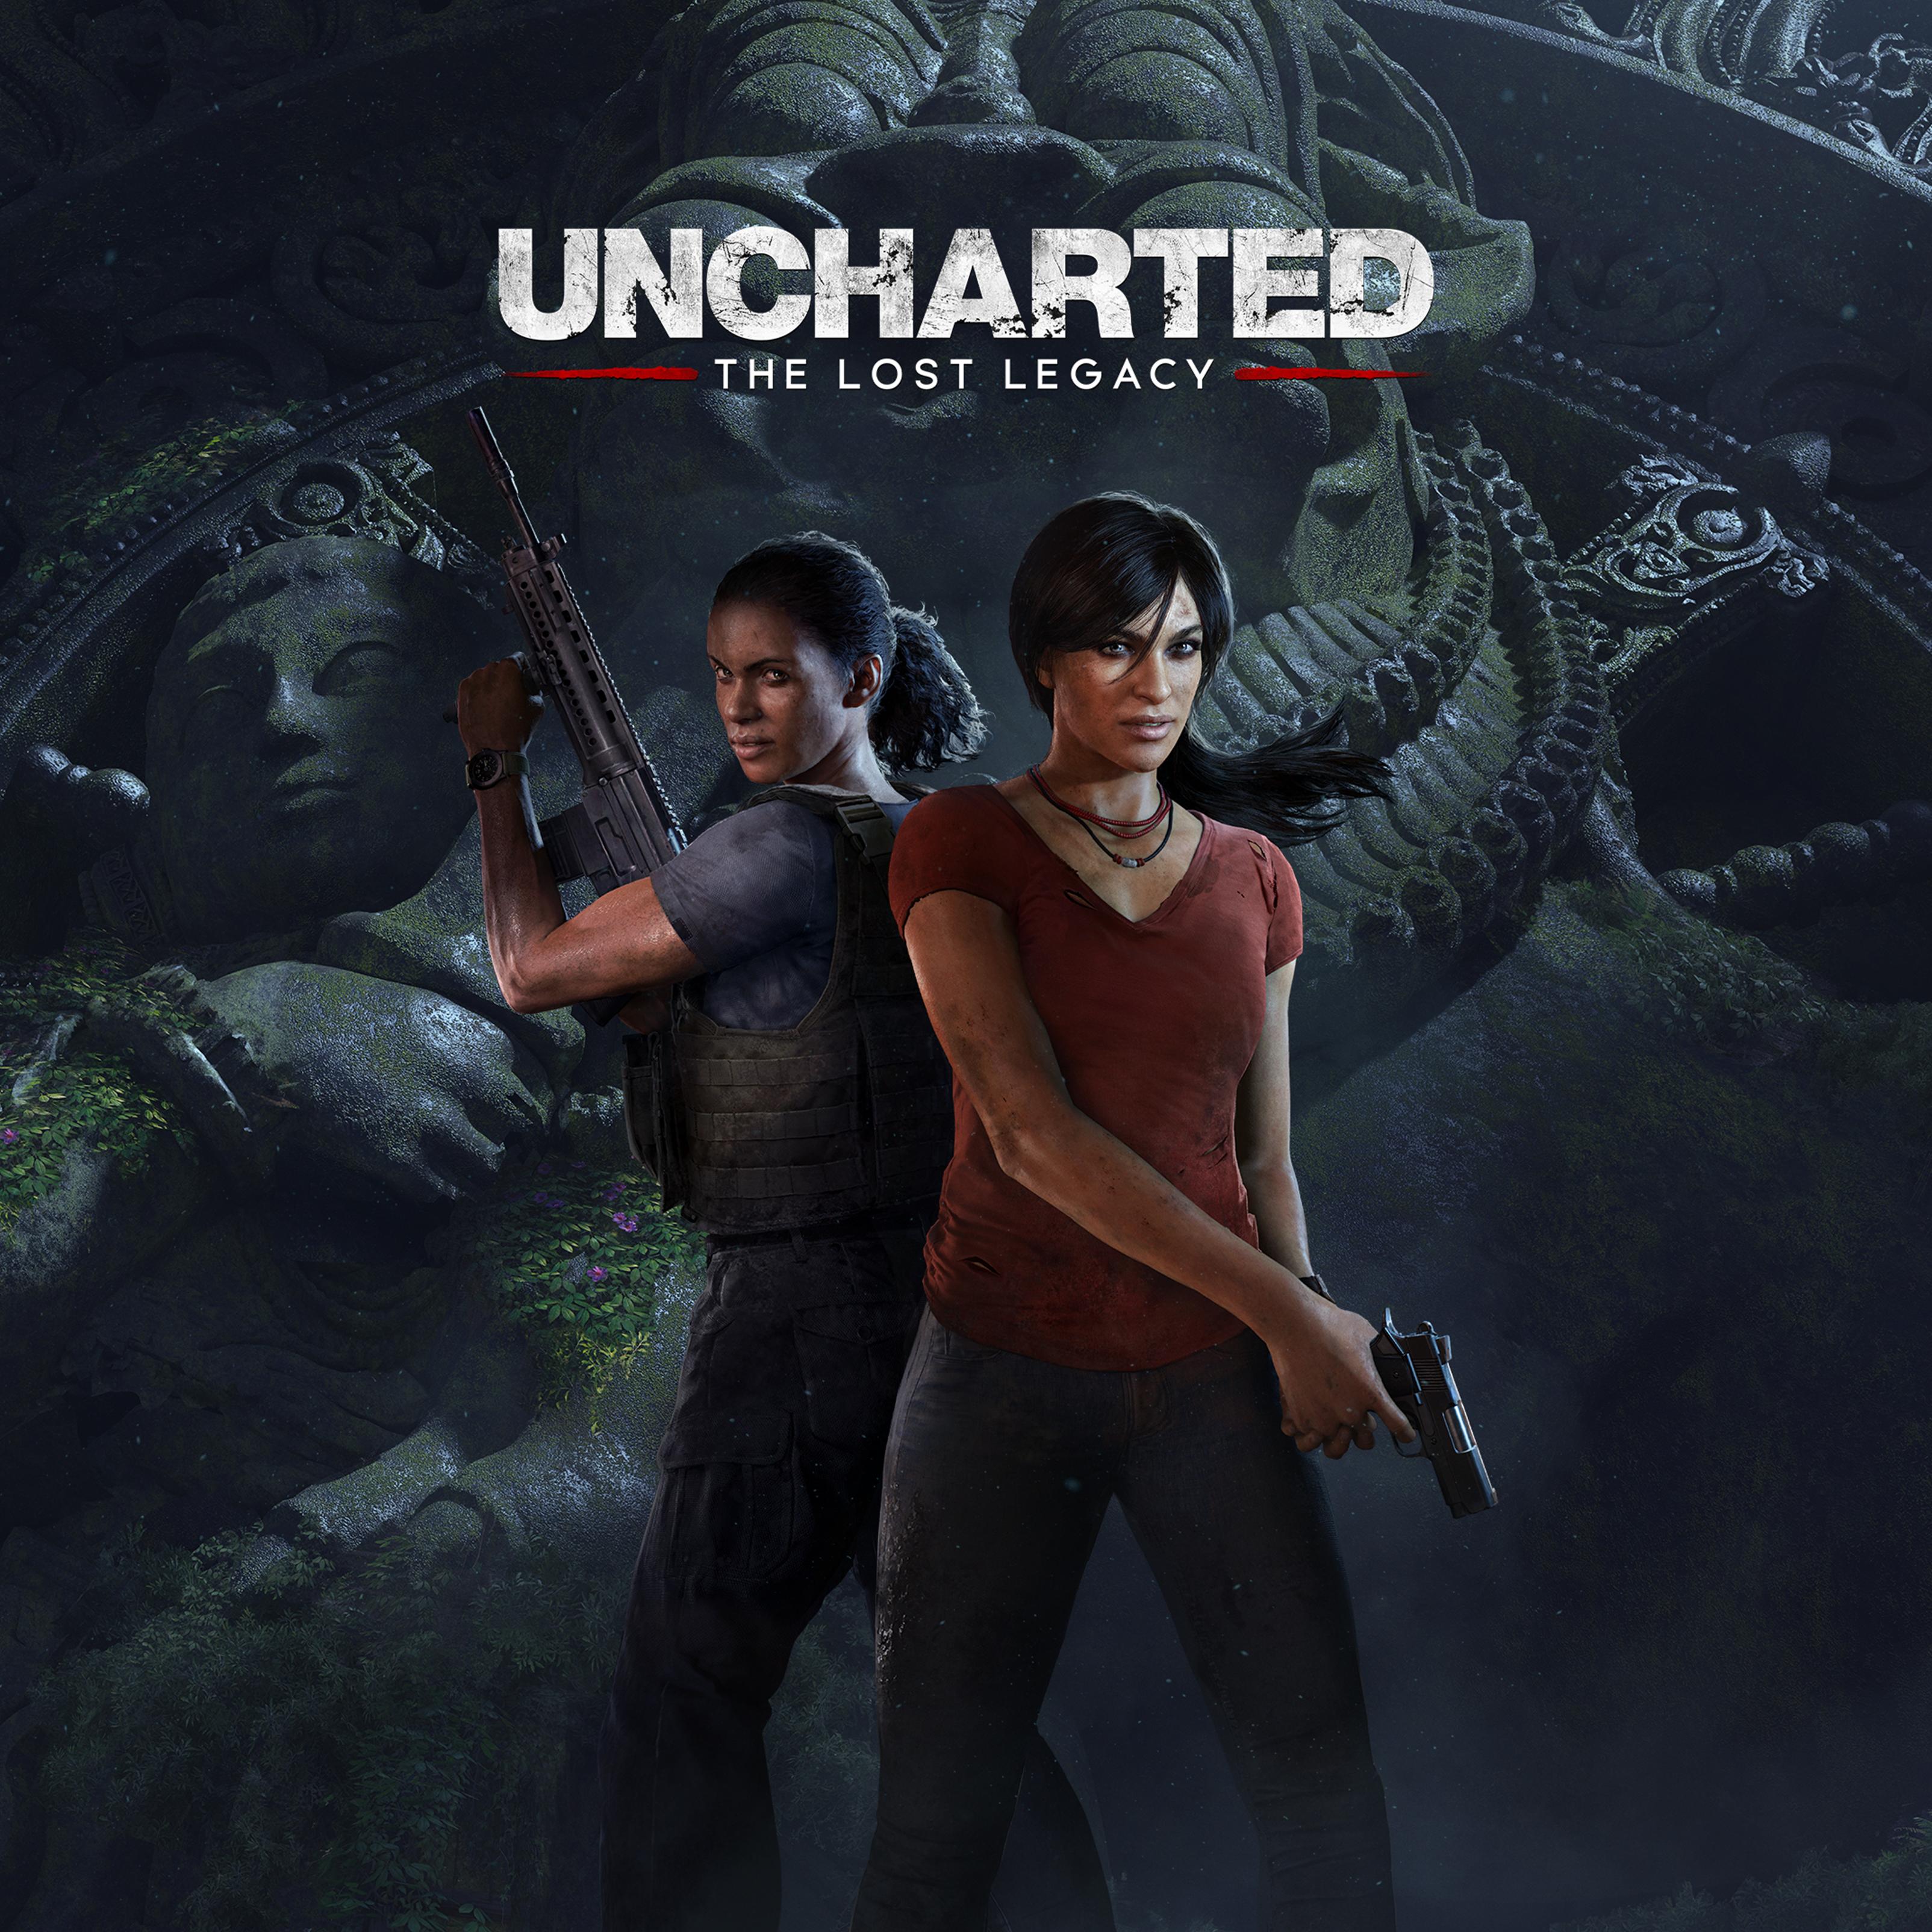 Celebrate next weeks Uncharted The Lost Legacy release with new